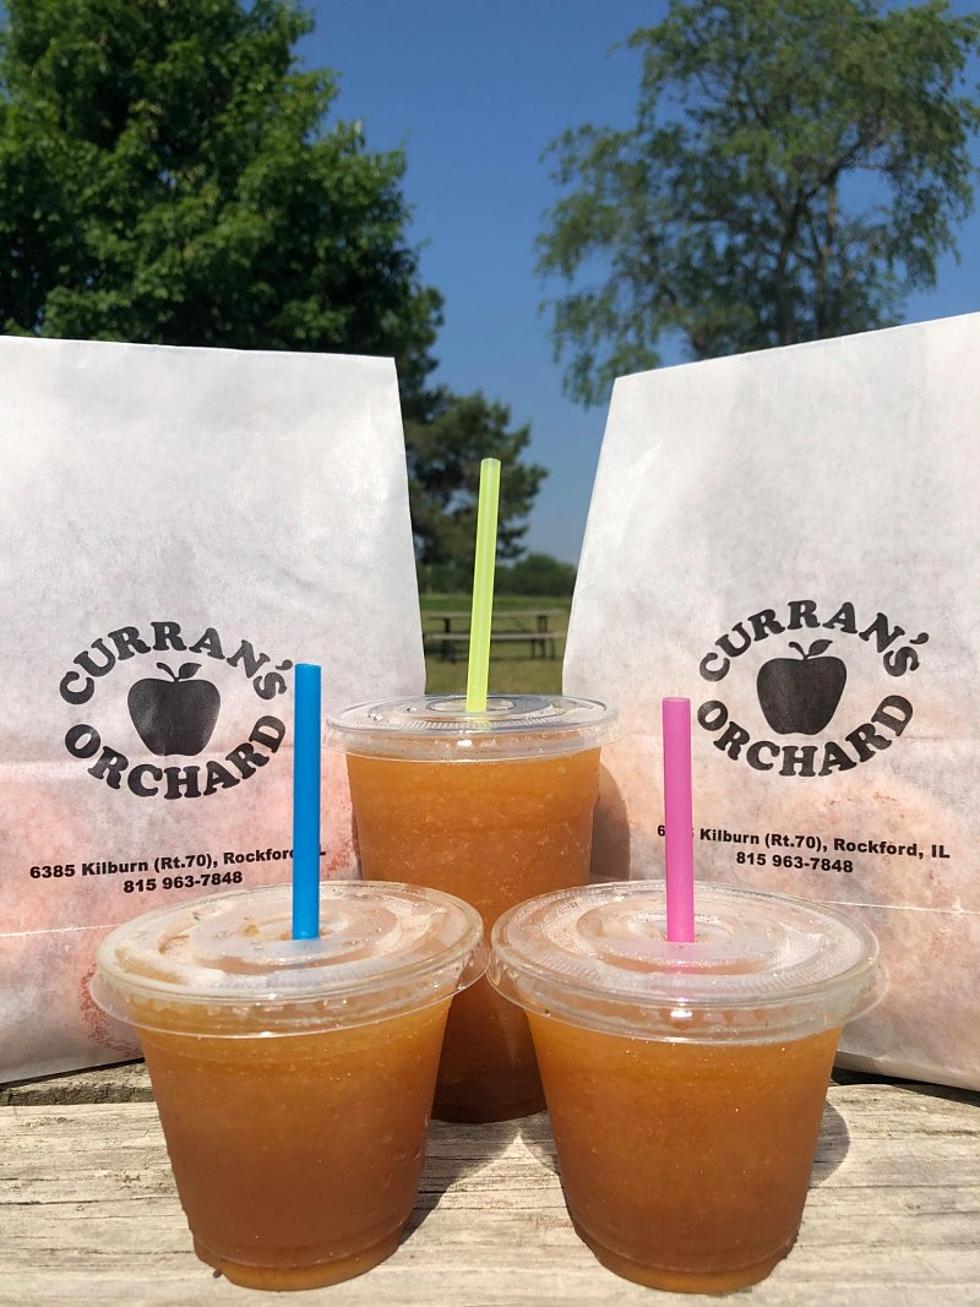 It’s Almost Last Call for Summer Treats at Curran’s Orchard in Rockford